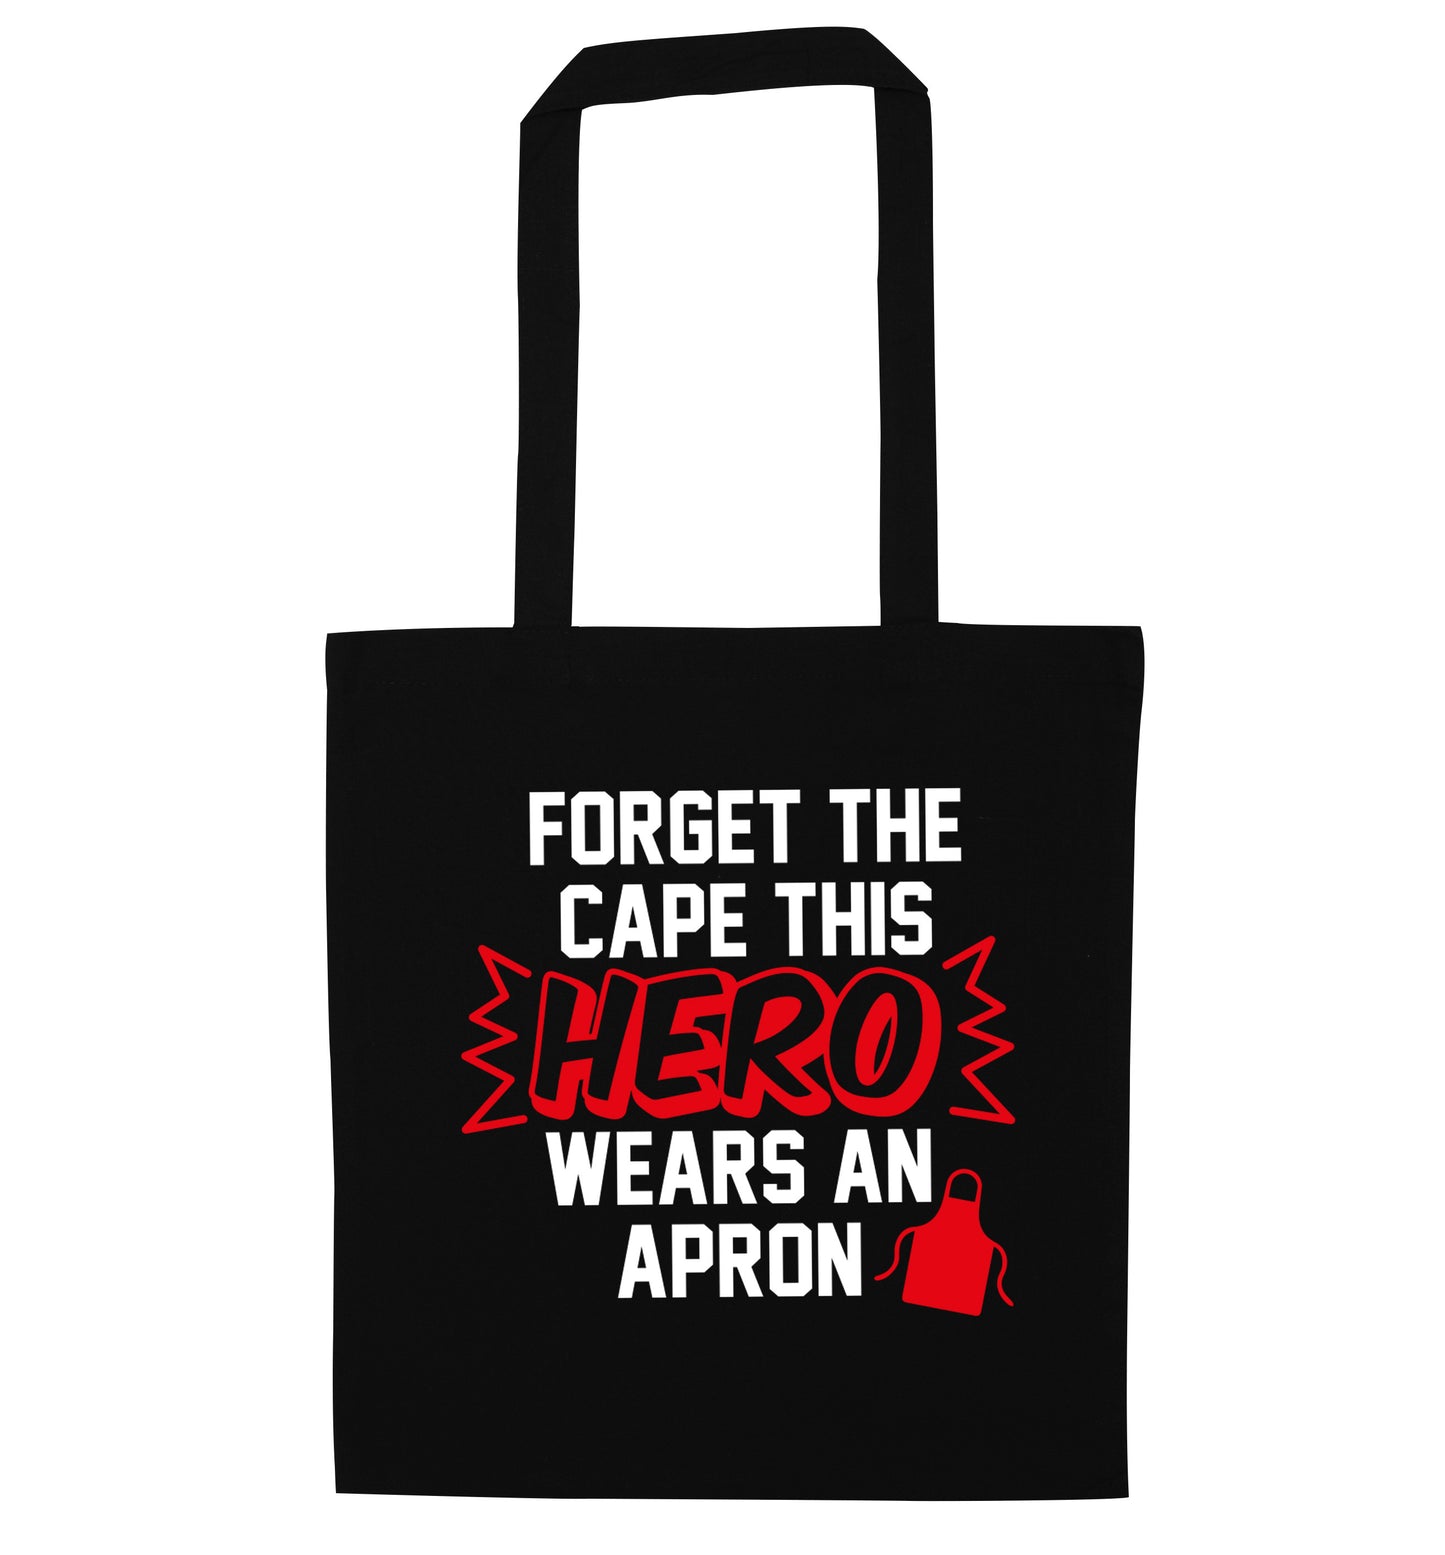 Forget the cape this hero wears an apron black tote bag